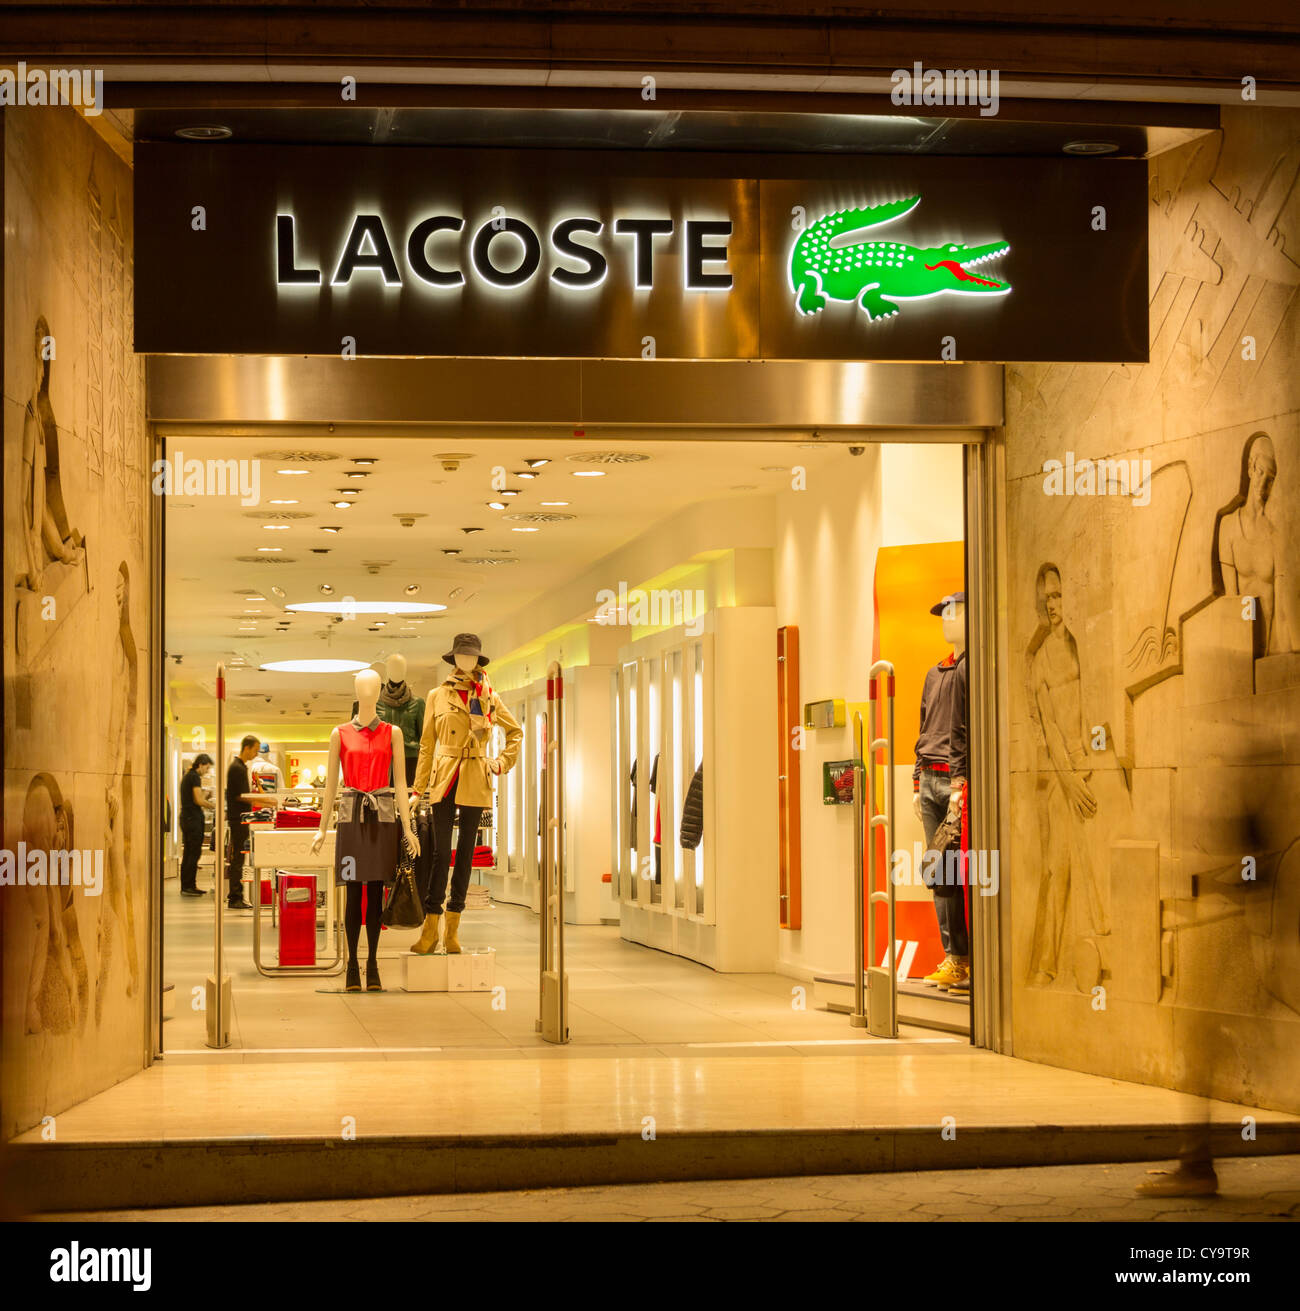 Lacoste Store High Resolution Stock Photography and Images - Alamy